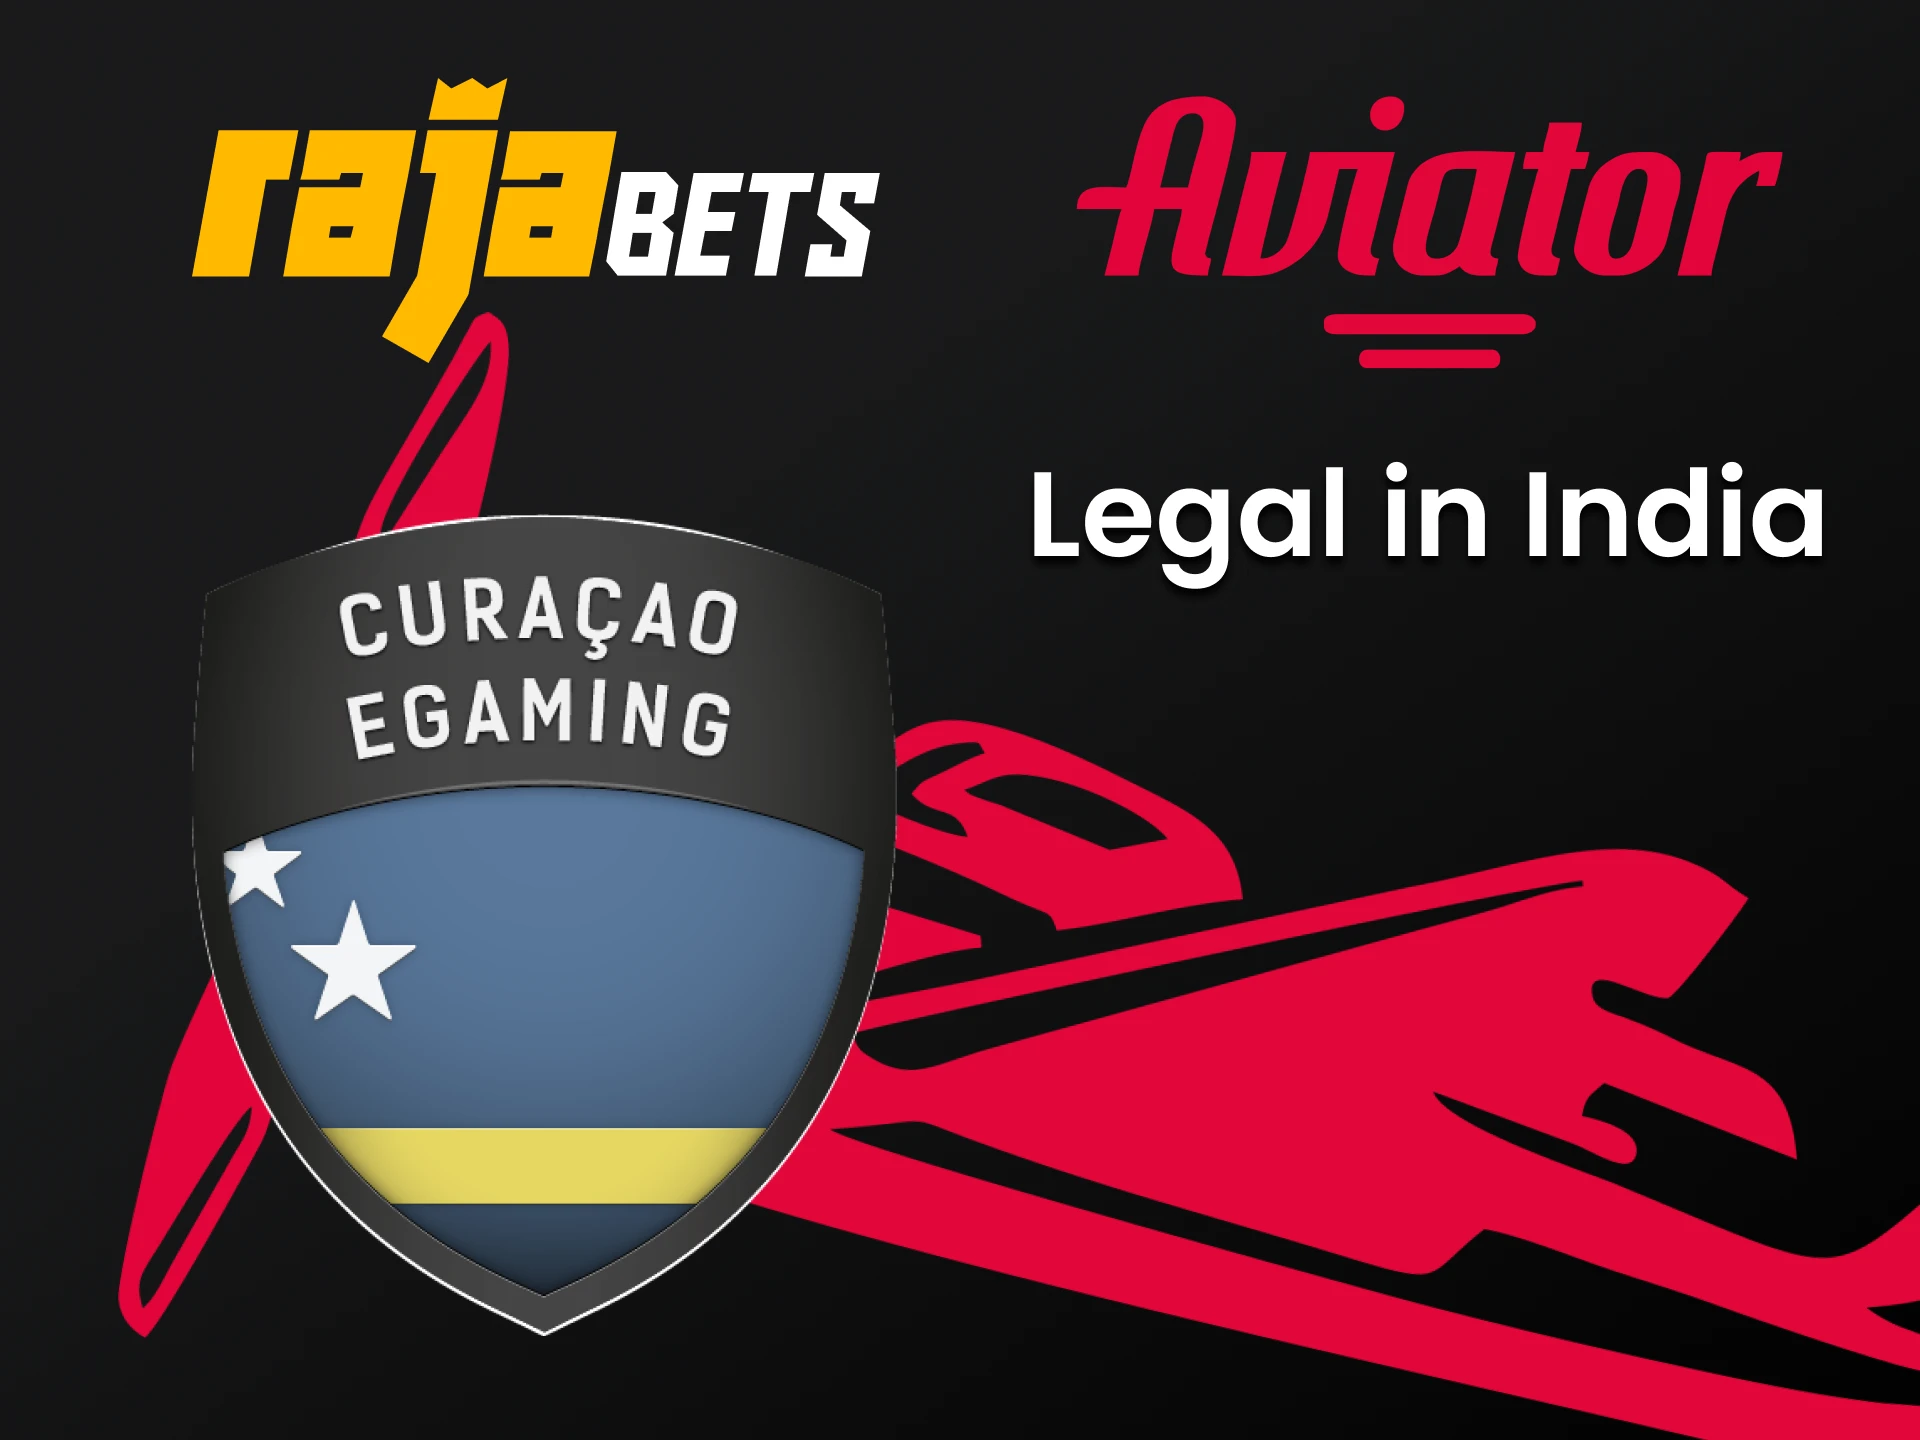 It is legal to play Aviator on Rajabets.